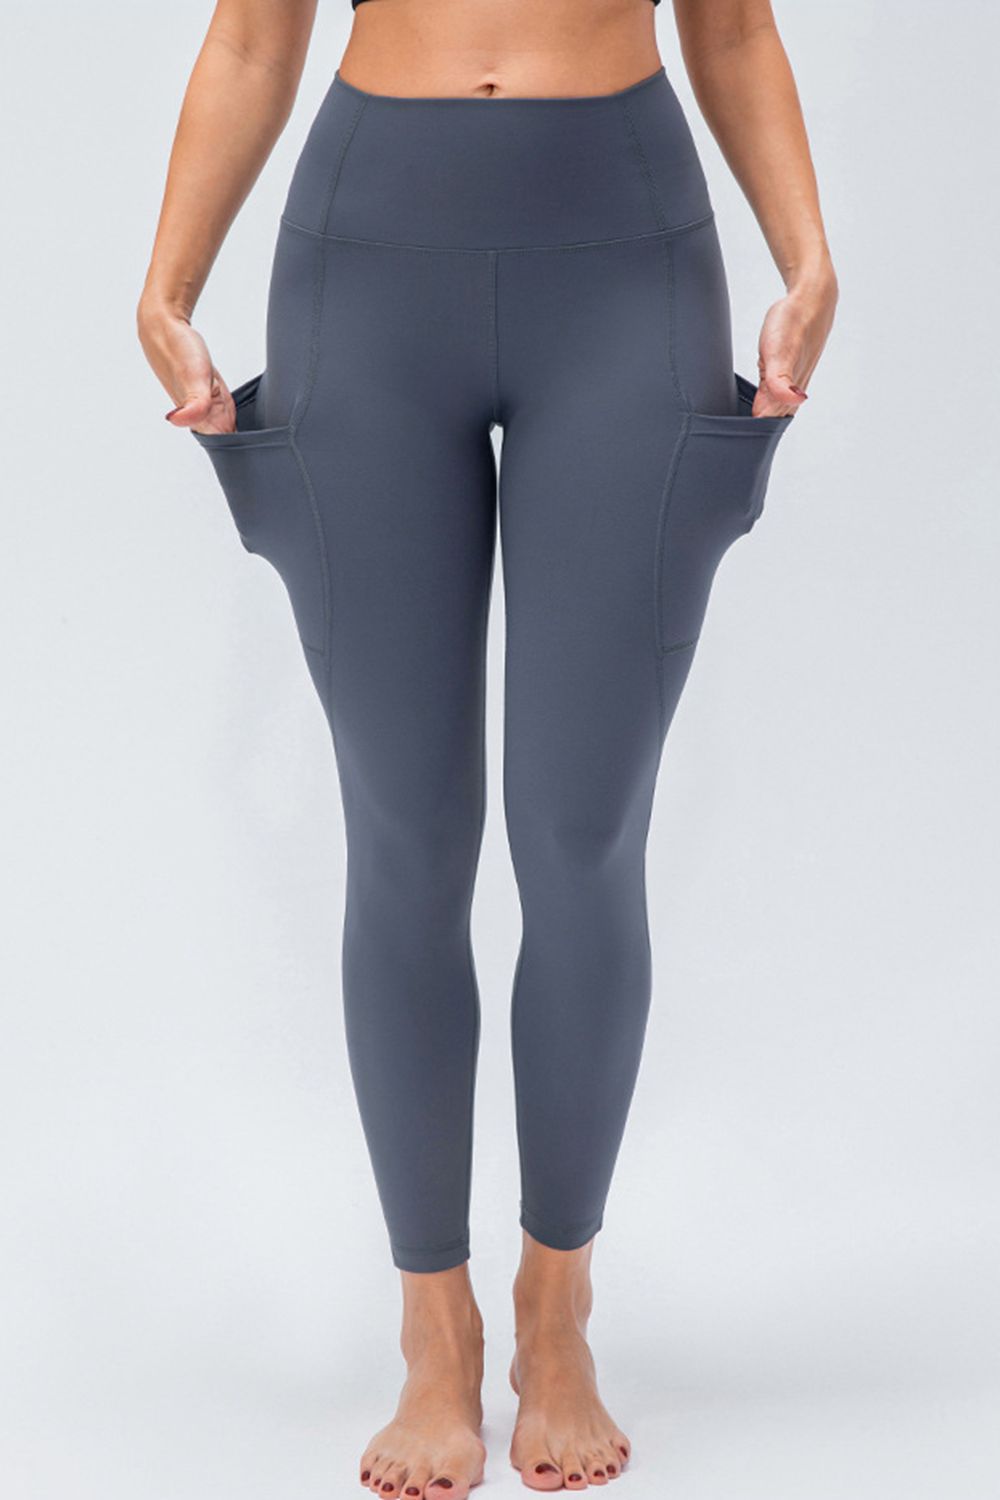 Breathable Wide Waistband Active Leggings with Pockets | Augie & April